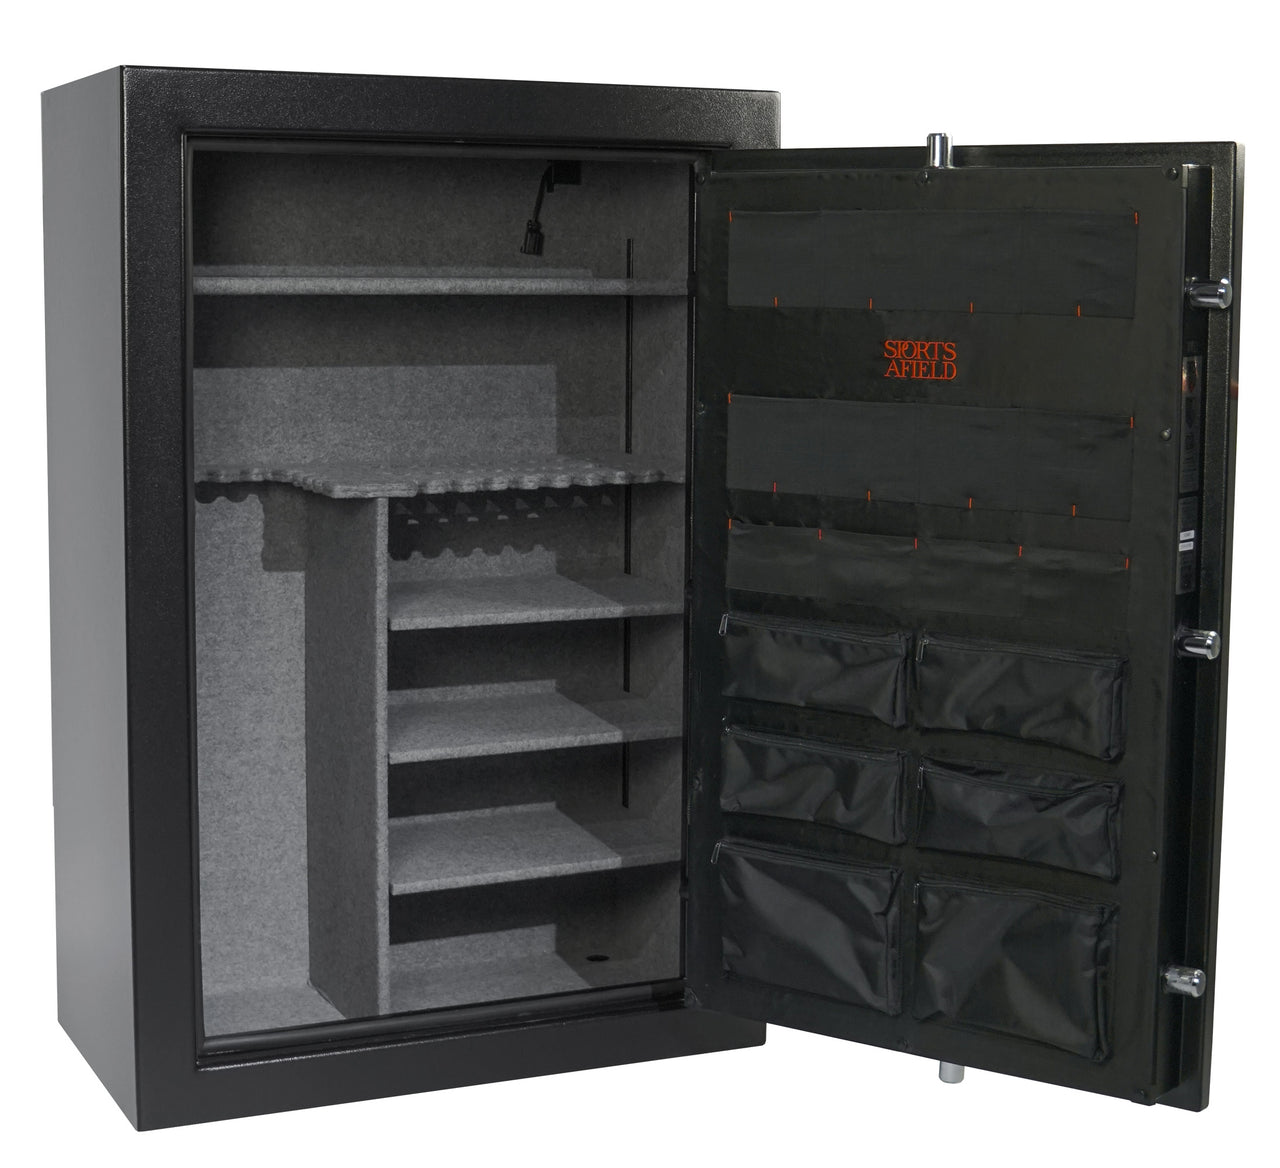 Sports Afield SA5940P PRESERVE SERIES – FIRE-RATED 40-GUN SAFE